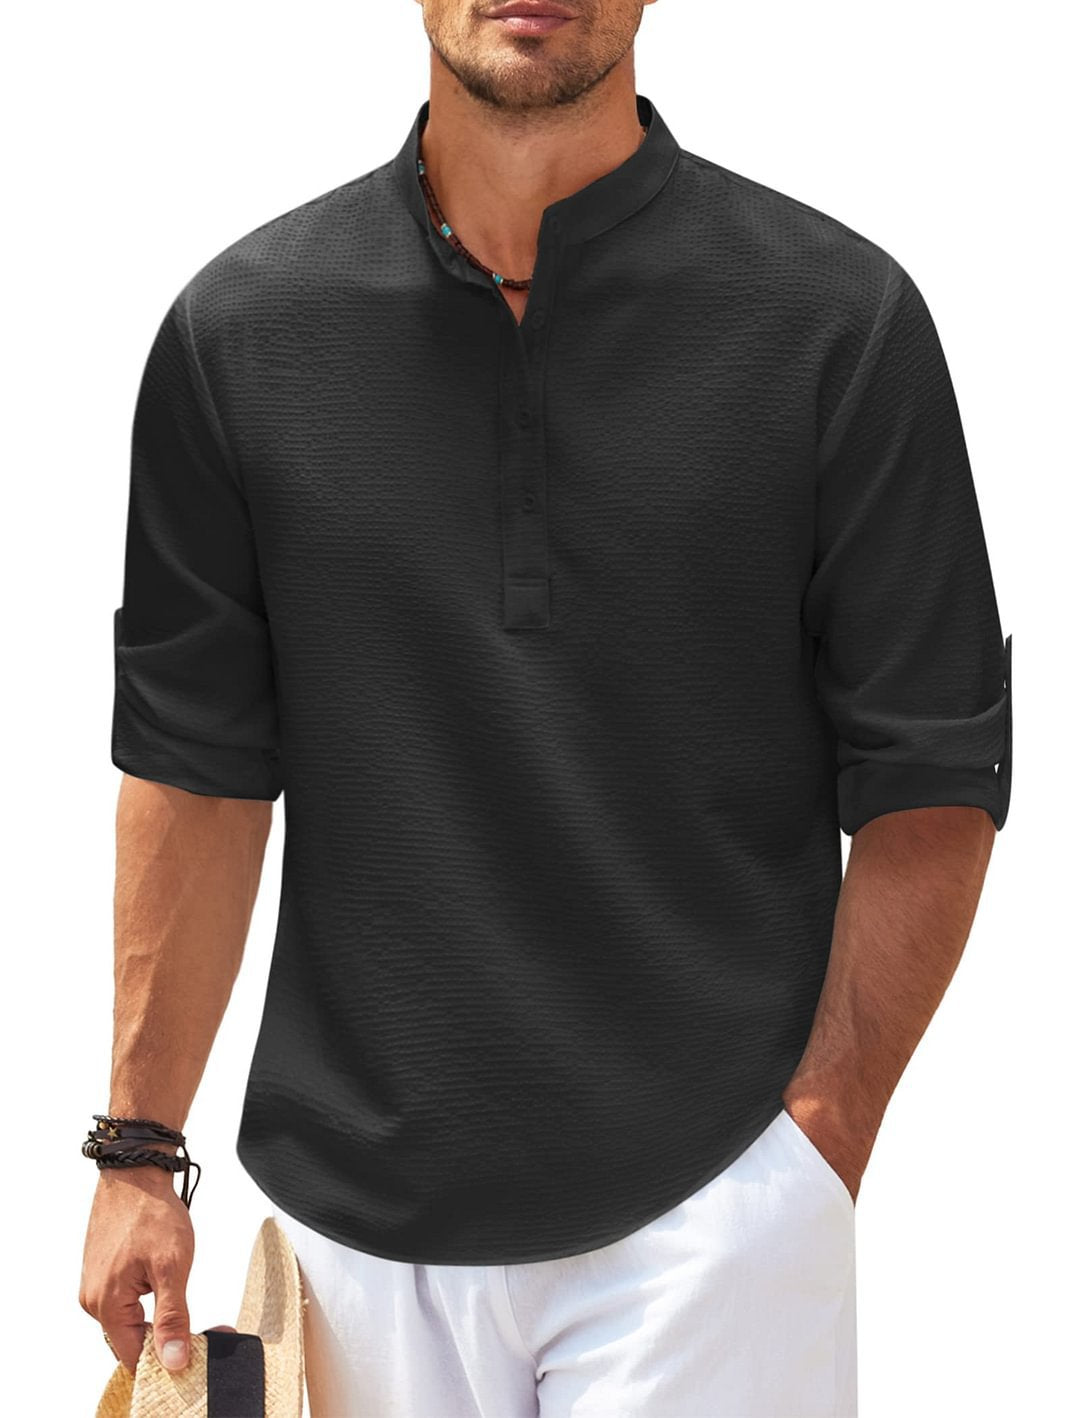 Men's Long Sleeve Stand Collar Solid Color Shirt GlamzLife